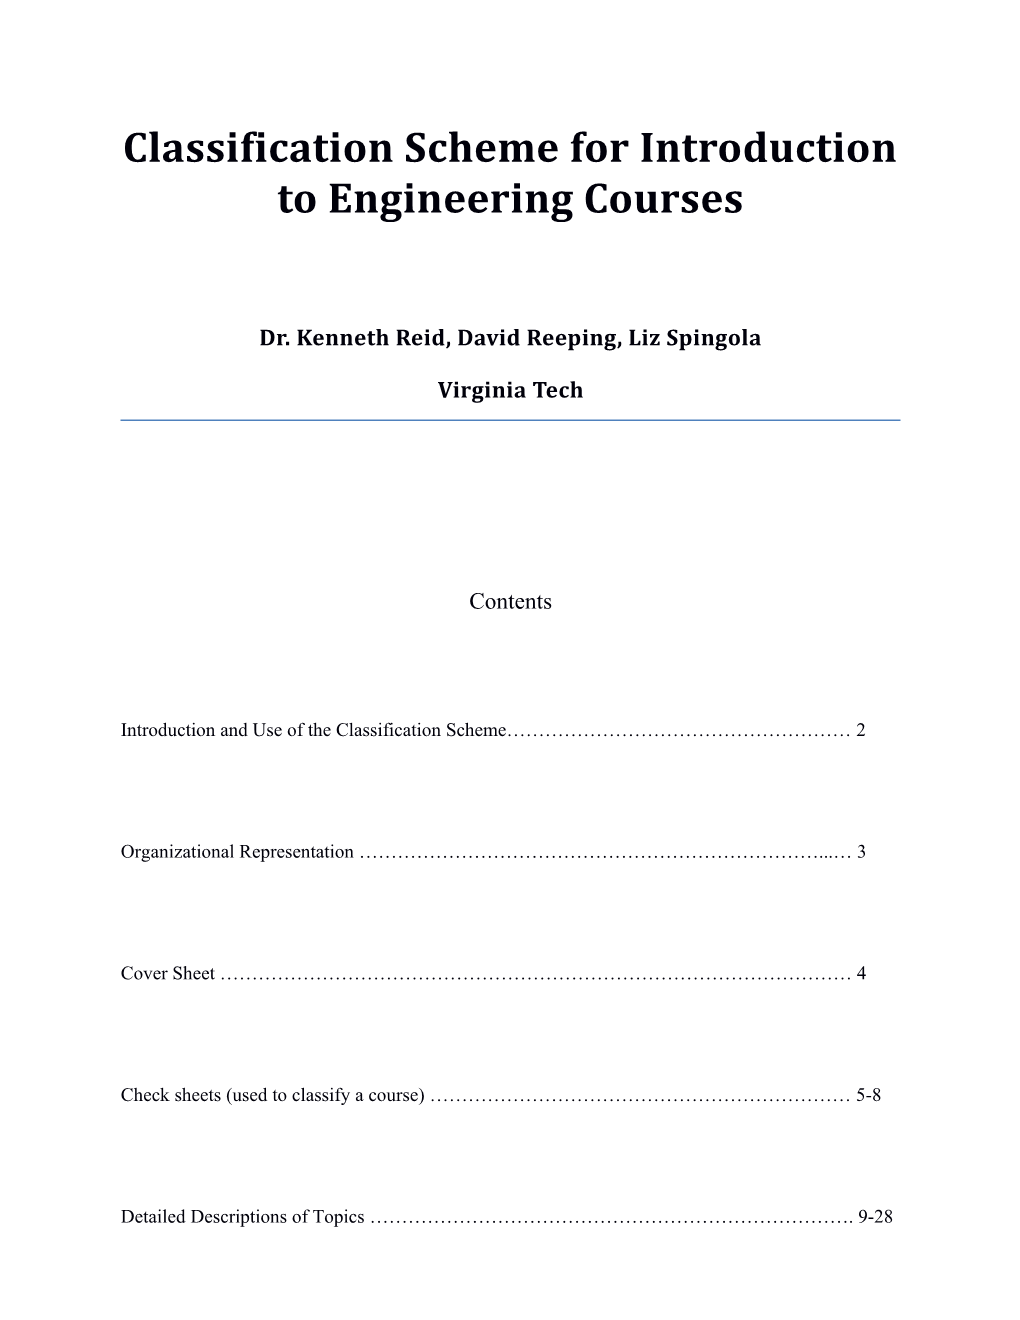 Classification Scheme for First Year Engineering Courses